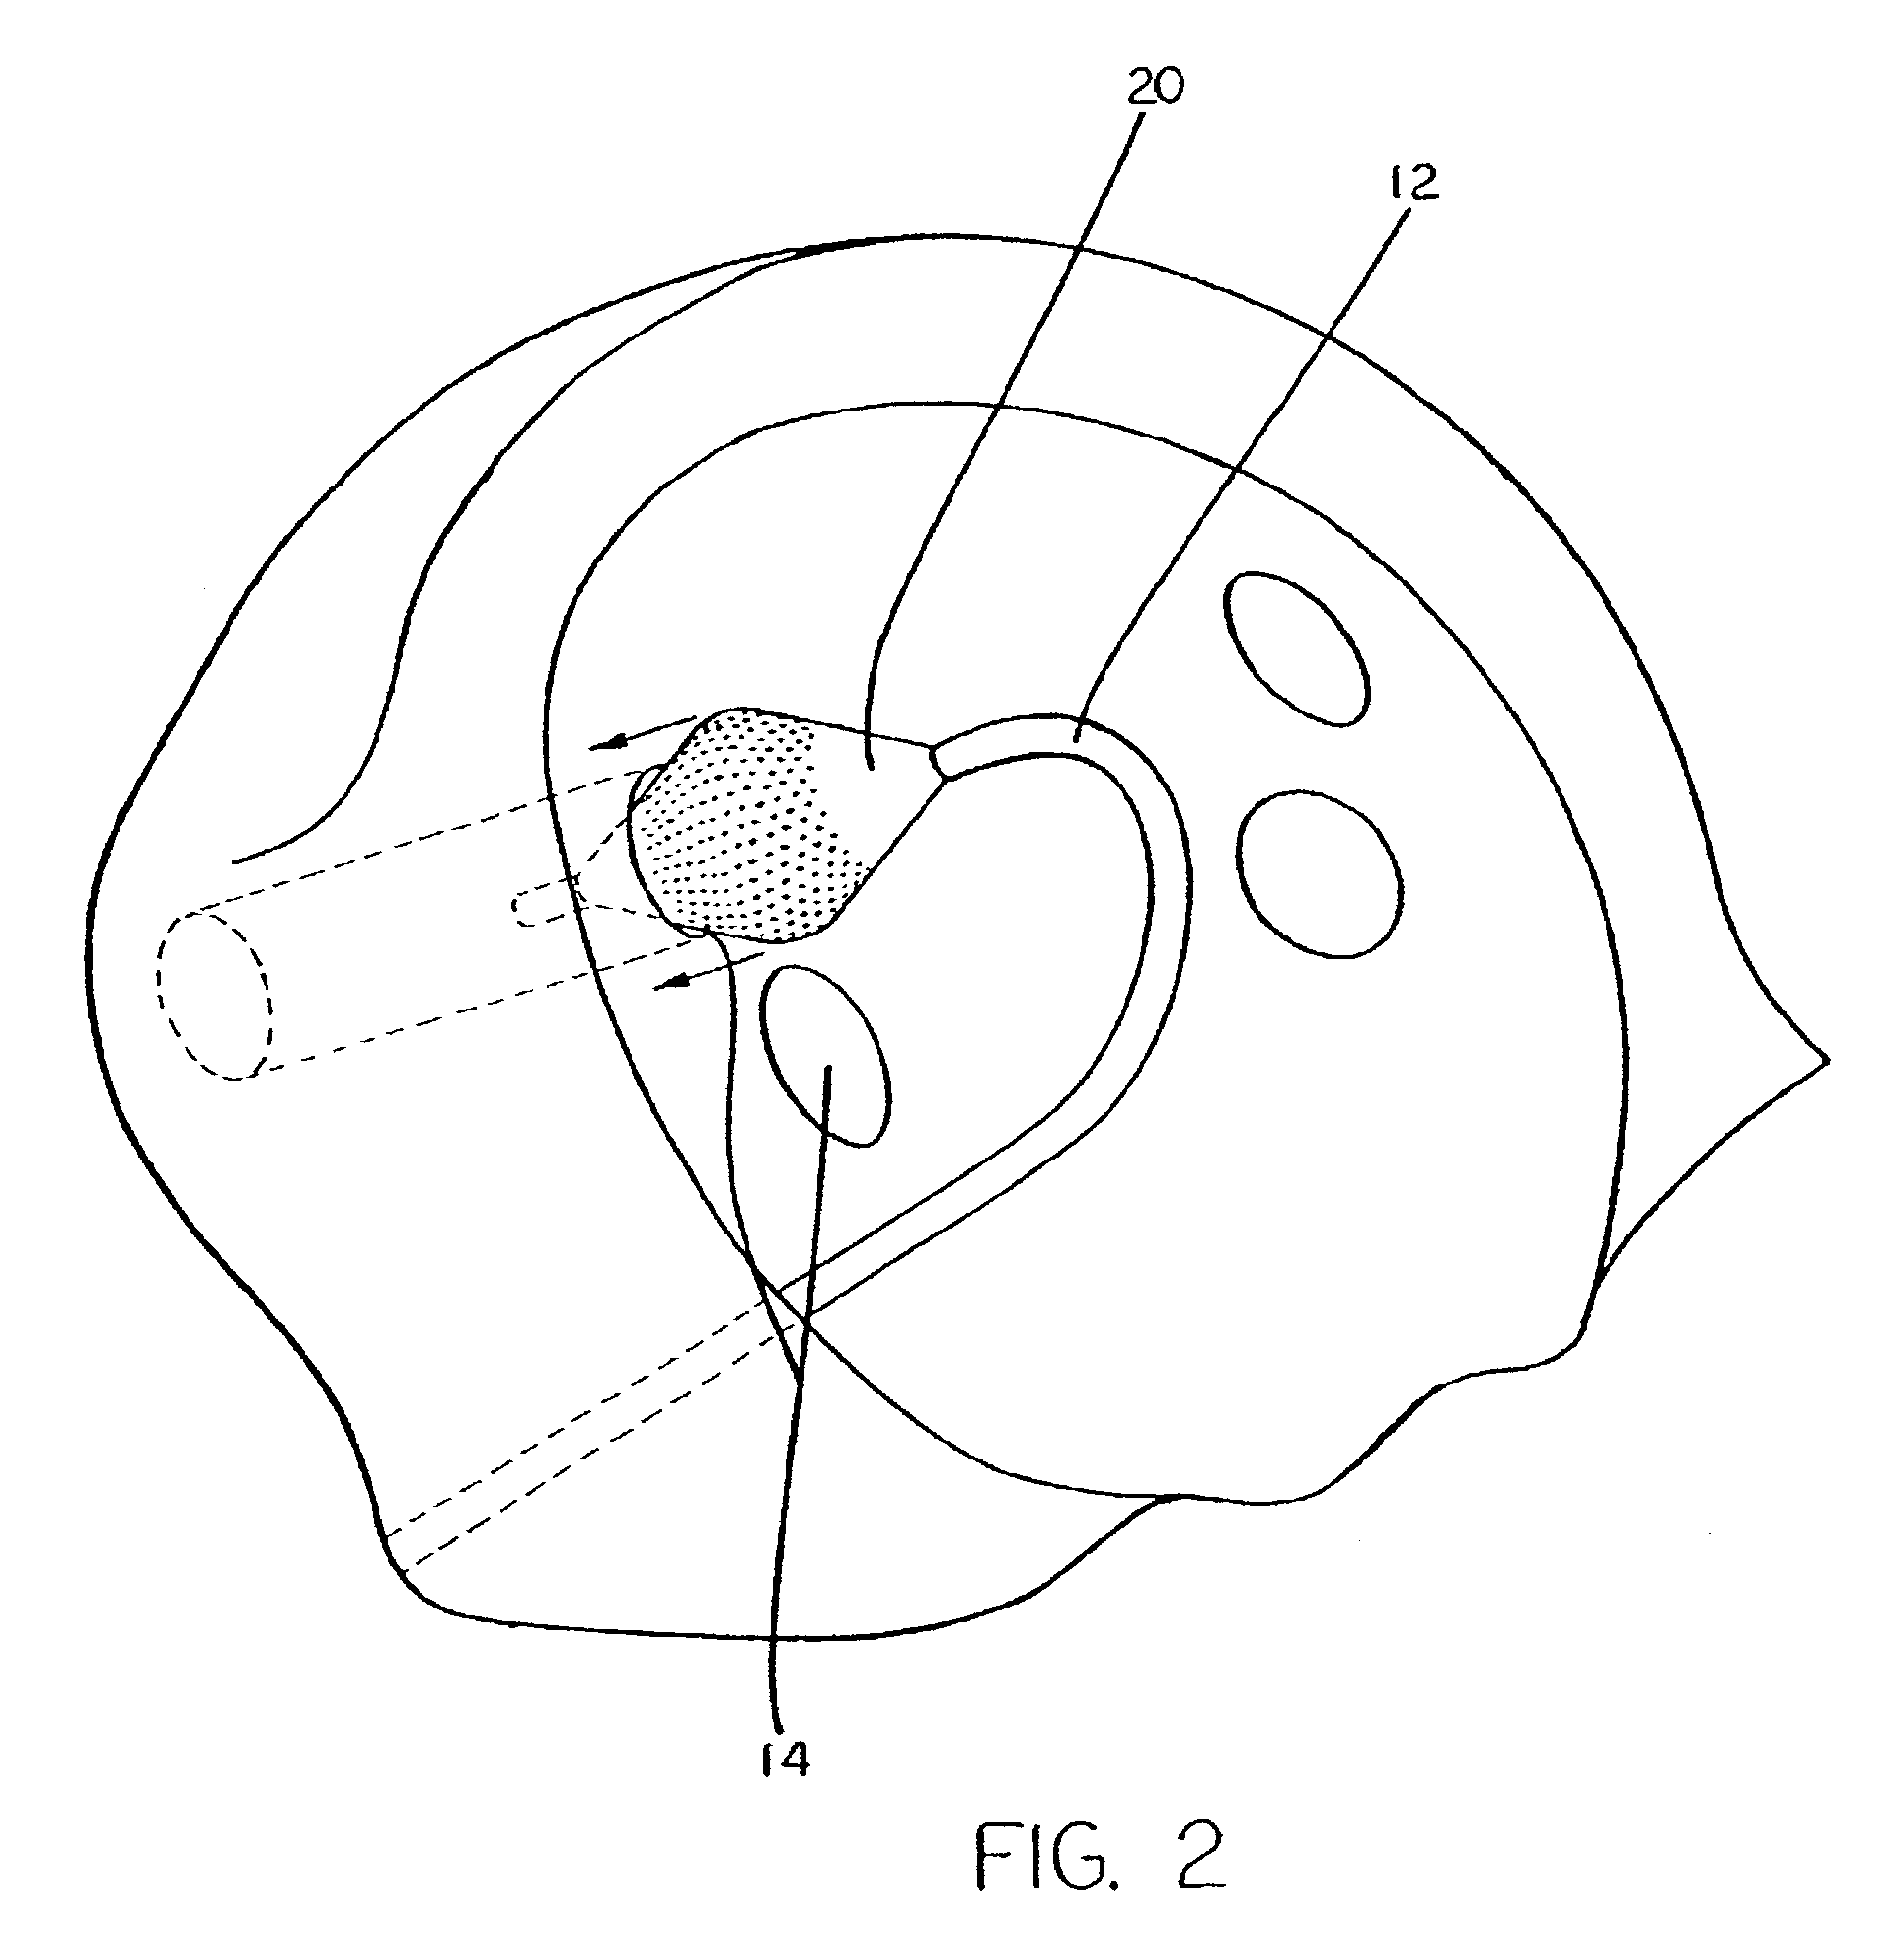 Process and device for the treatment of atrial arrhythmia